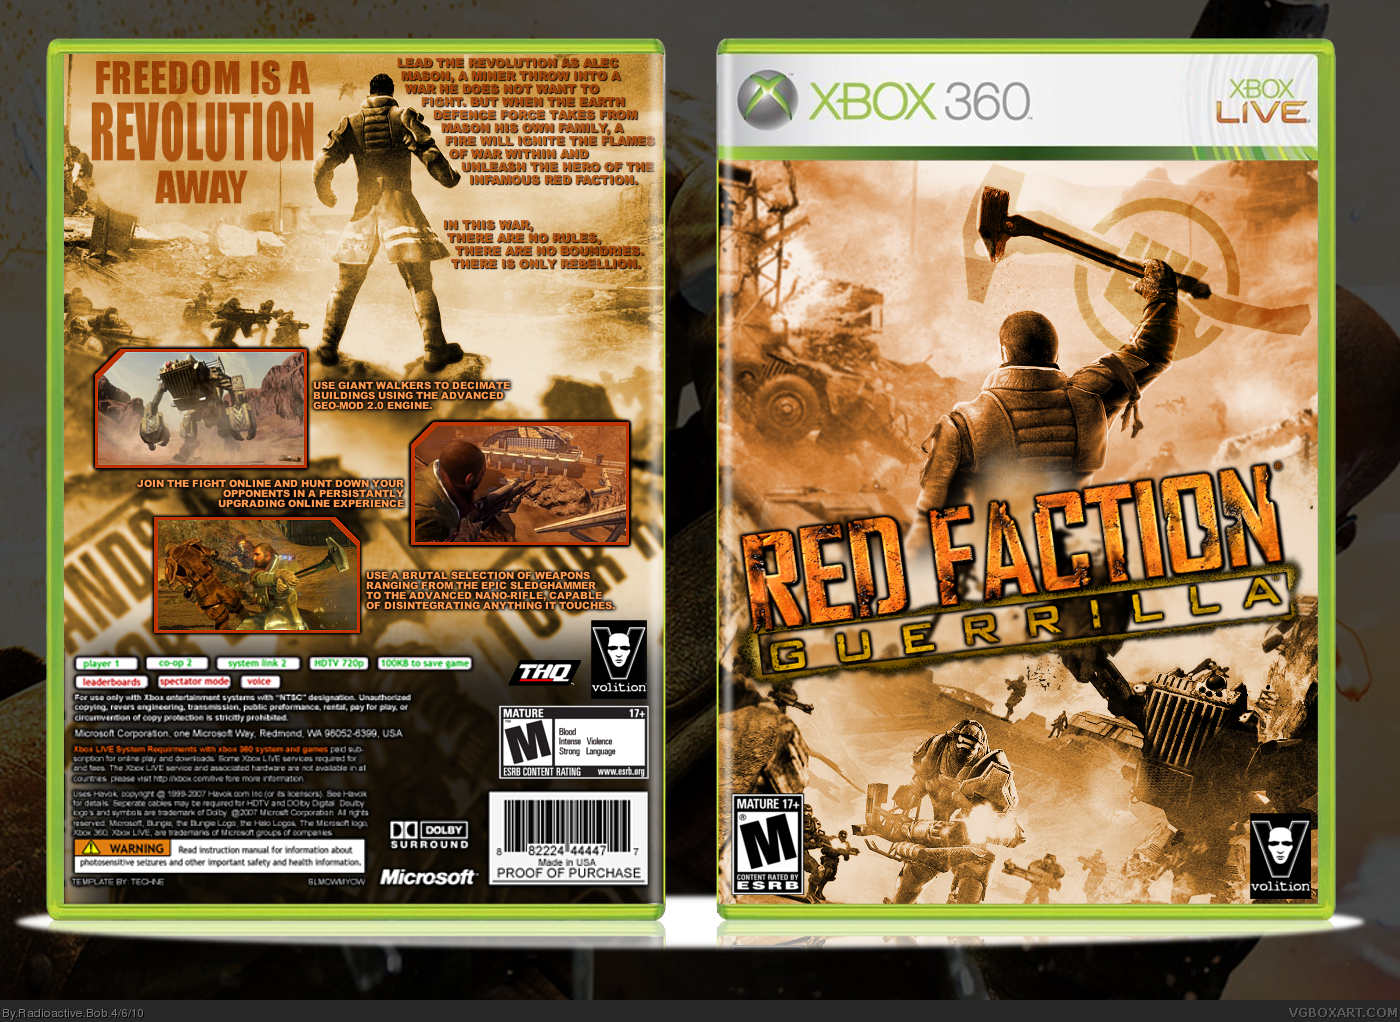 Red Faction Guerrilla box cover